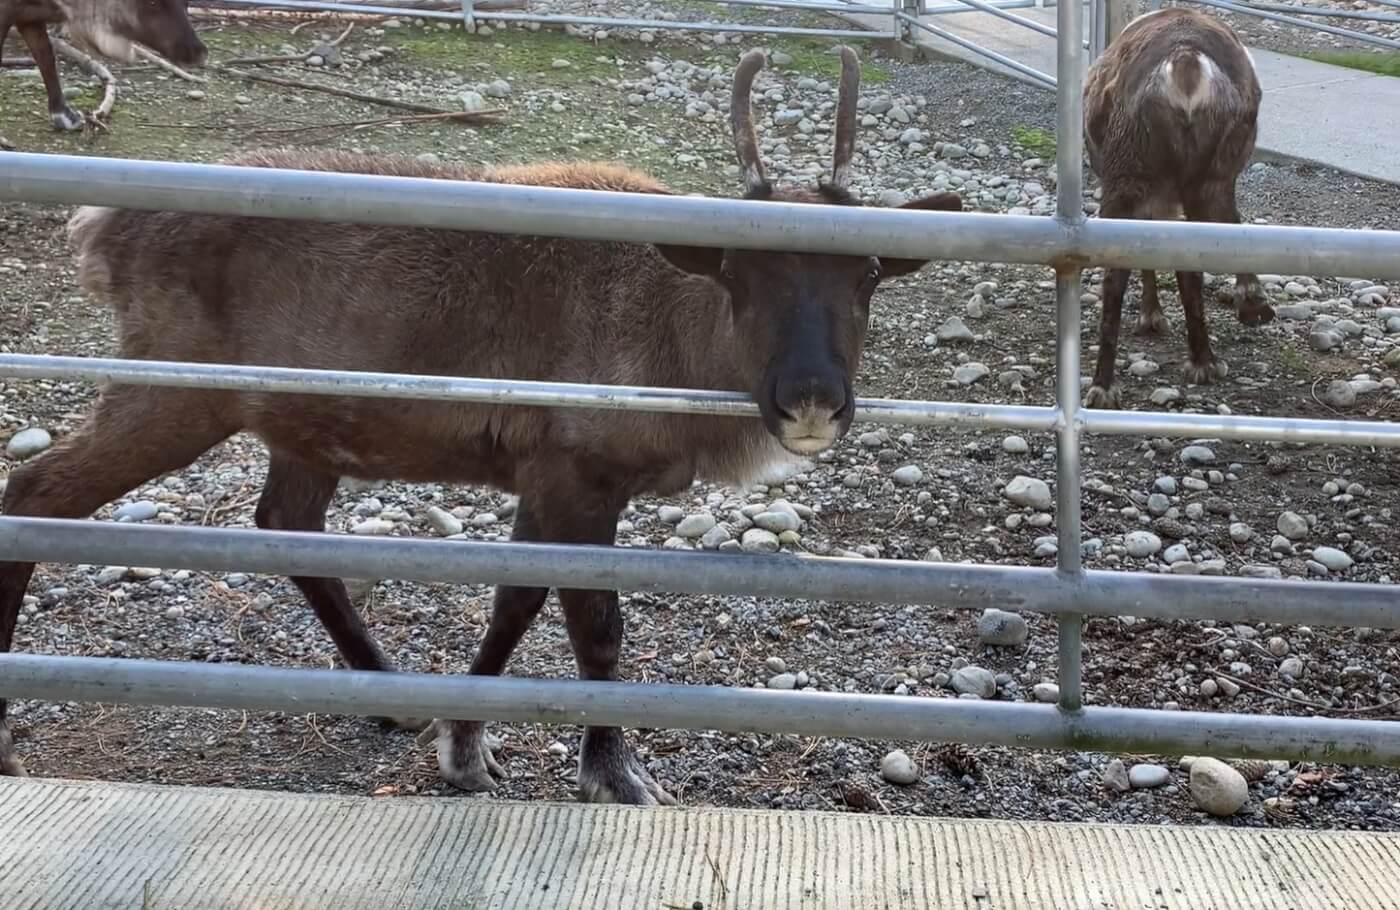 Two reindeer in a pen, who may have been used for Christmas events